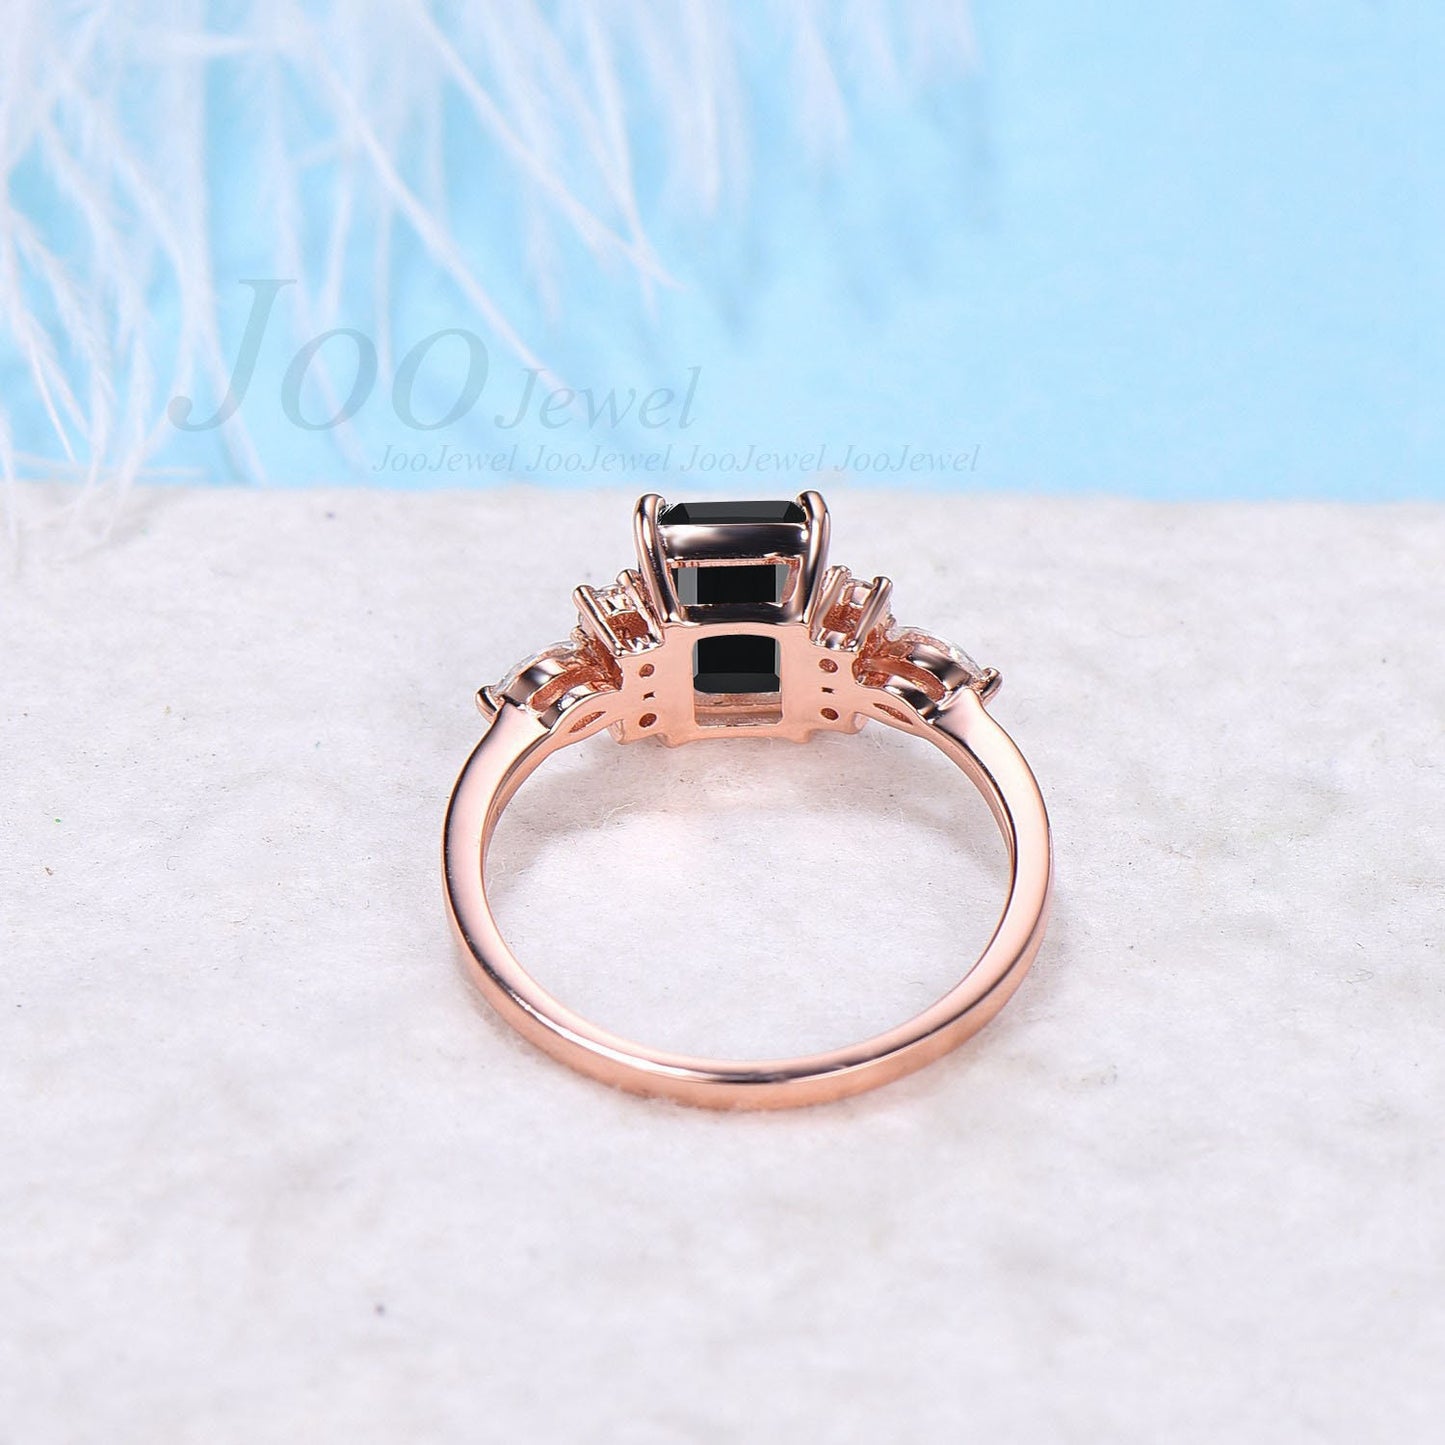 Oval Cut Real Black Onyx Ring Silver Ring With Black Stone Women Antique Vintage Onyx And Cz Diamond Ring Natural Black Onyx Wedding Ring